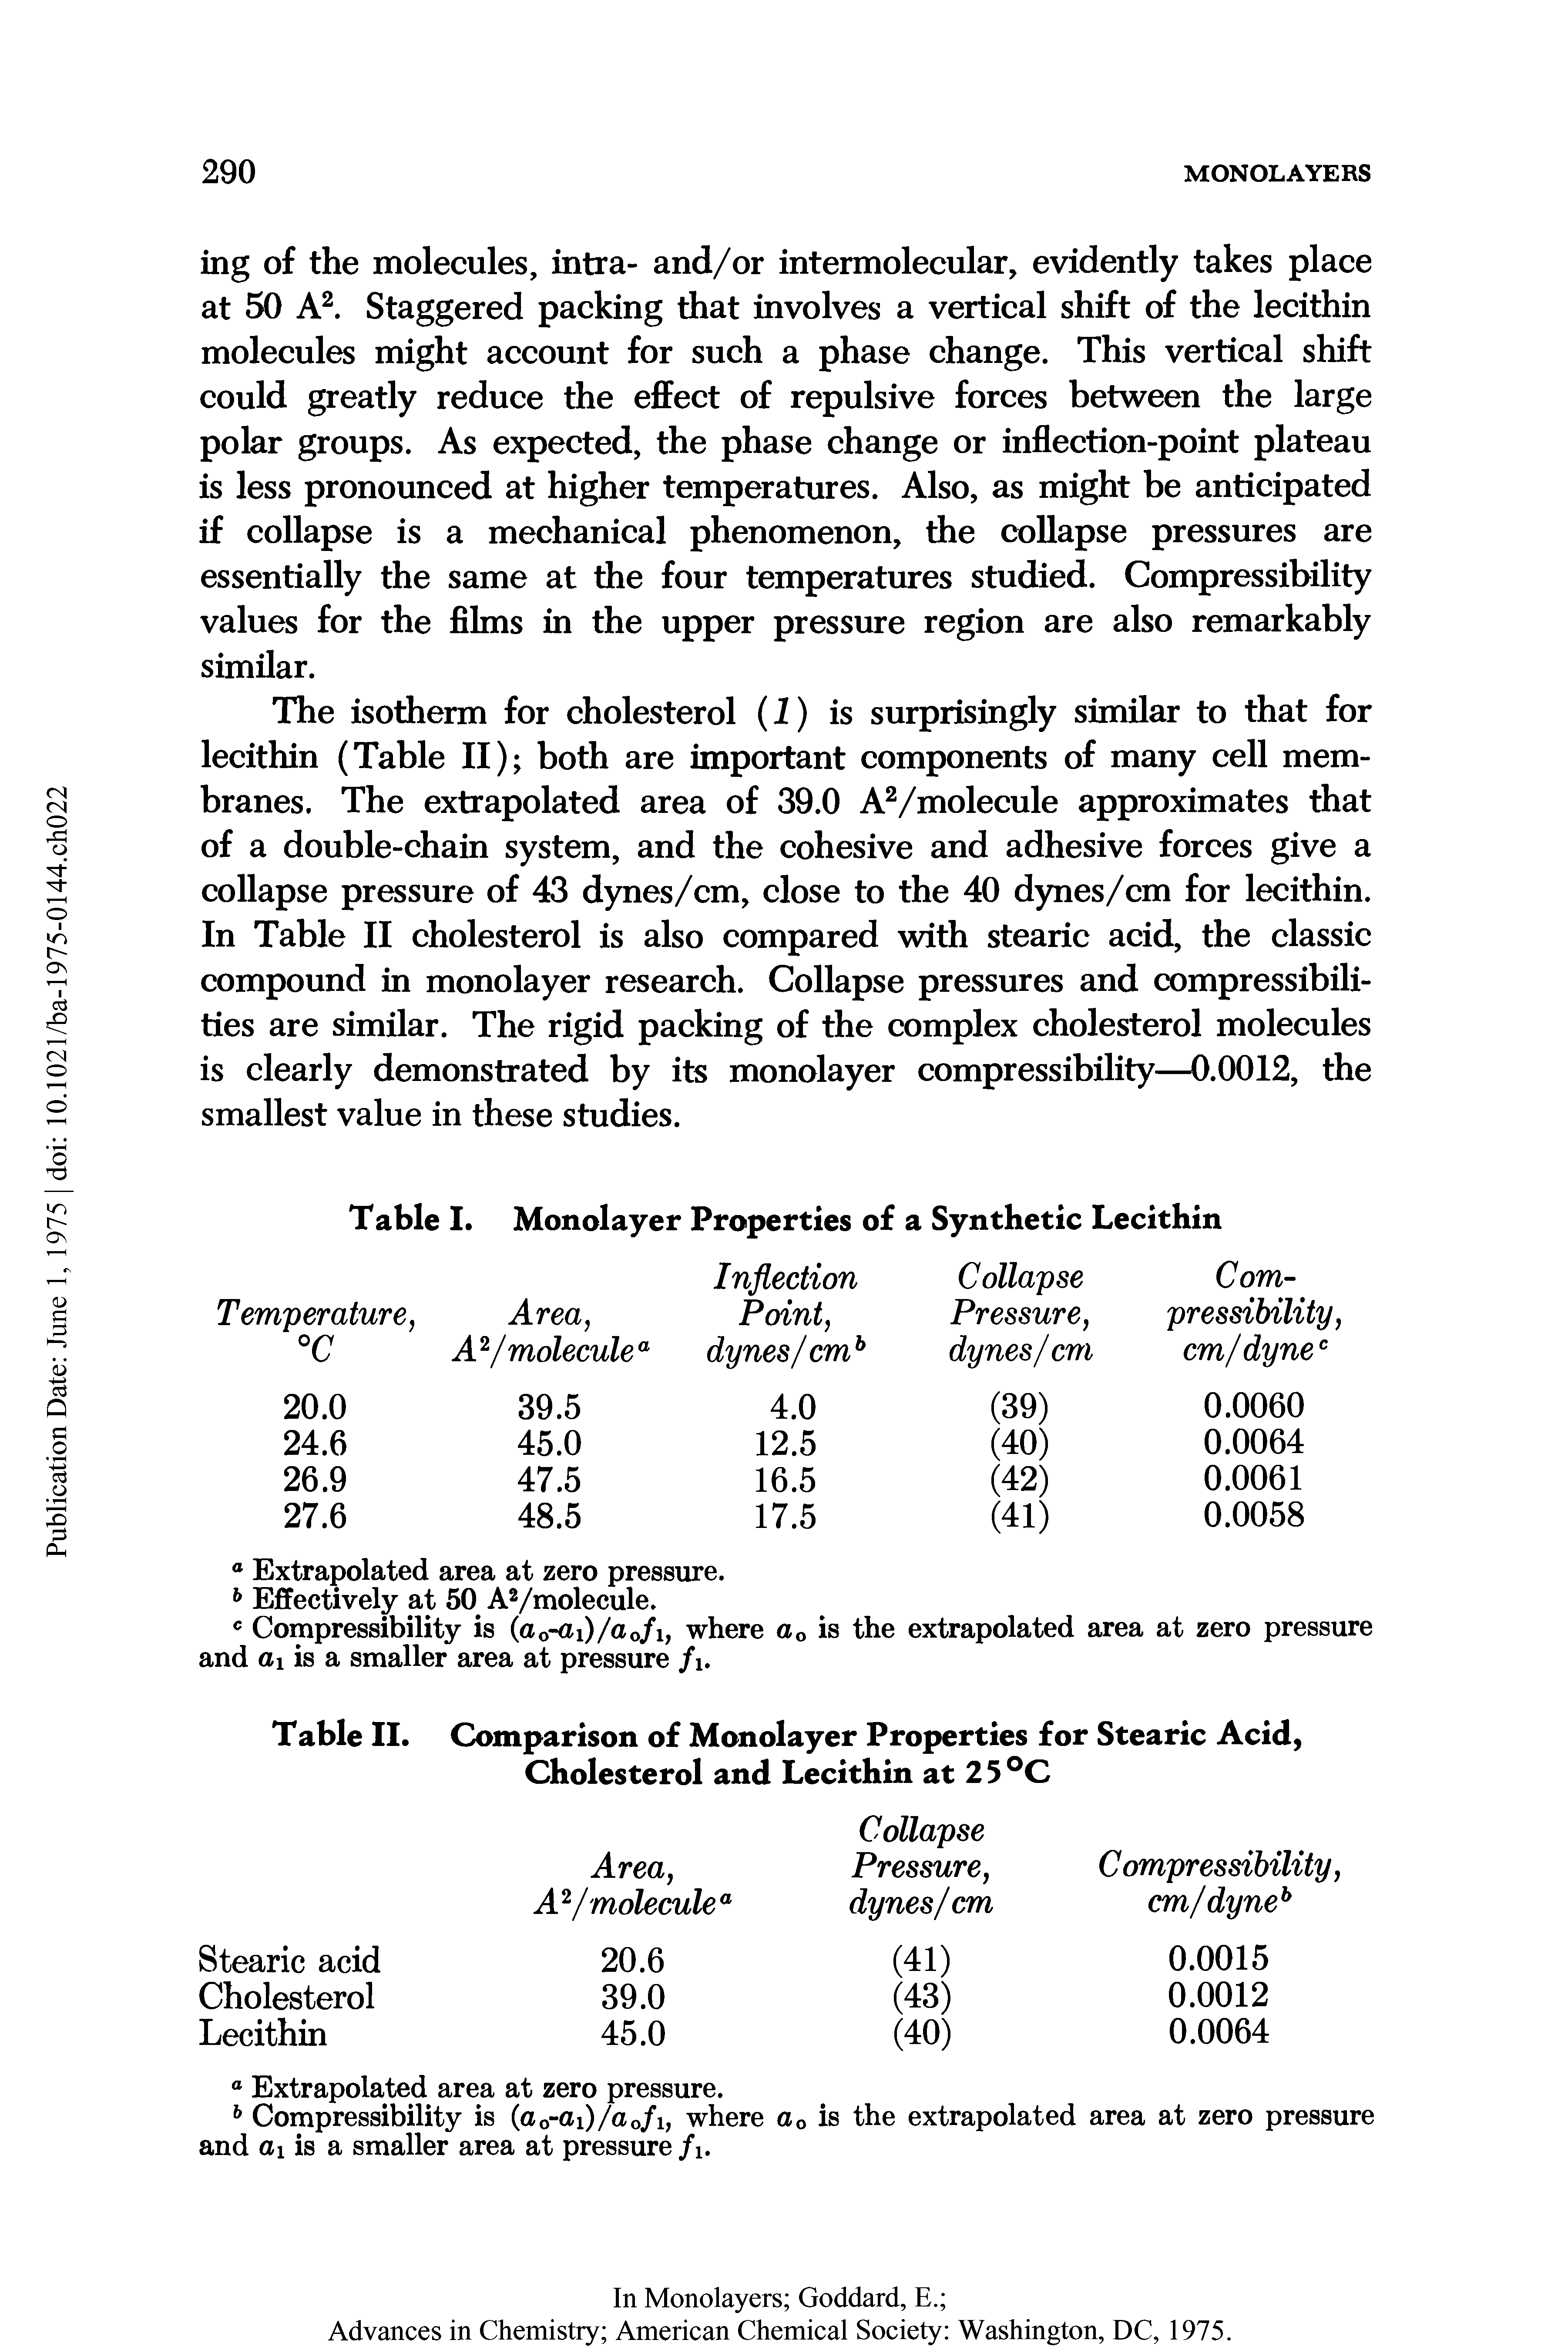 Table II. Comparison of Monolayer Properties for Stearic Acid, Cholesterol and Lecithin at 25°C...